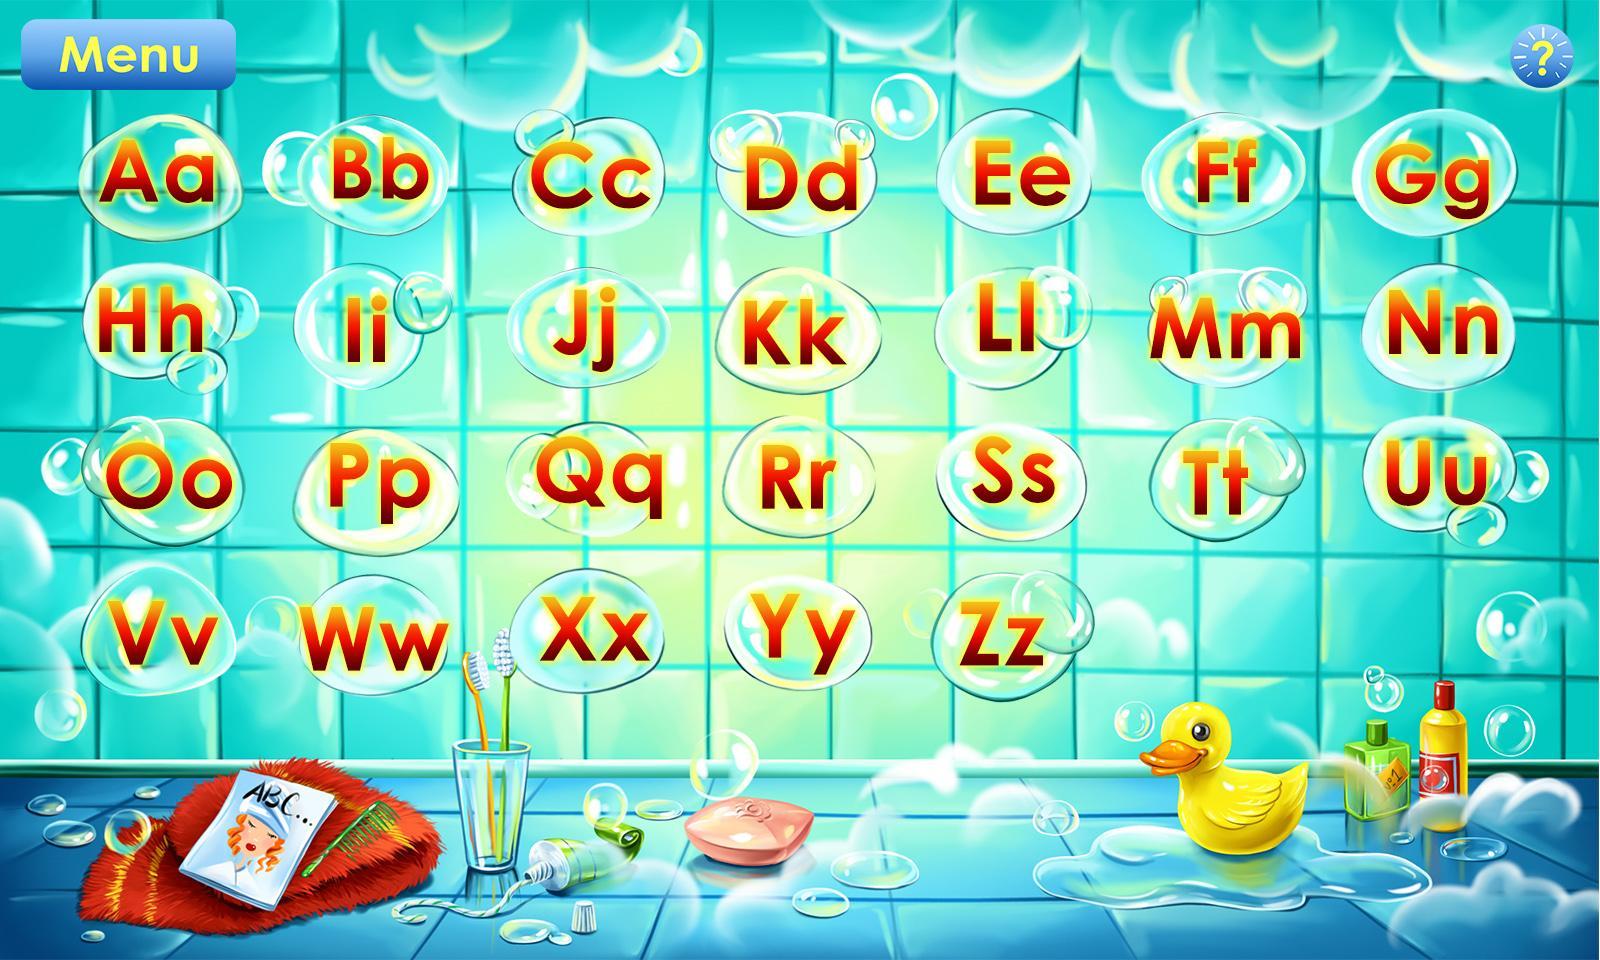 ABC Alphabet! ABCD games! Learn letters 1.5.23 Screenshot 2